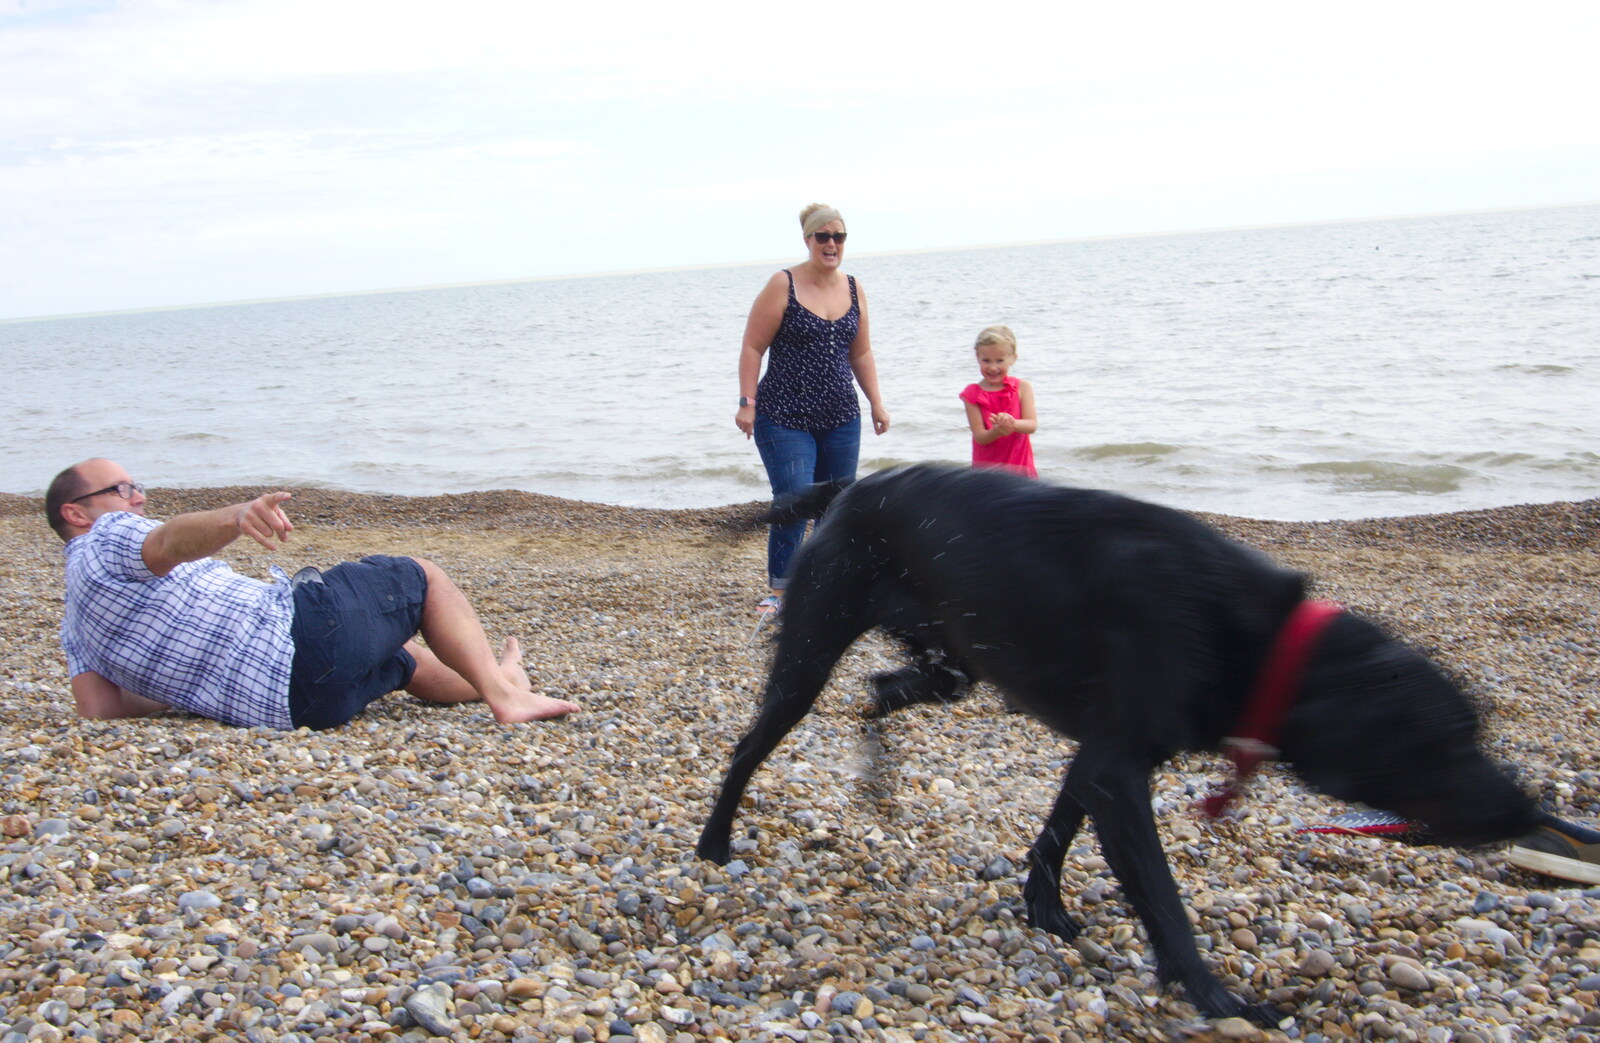 Andrew narrowly avoids a wet-dog shake from Cliff House Camping, Dunwich, Suffolk - 15th June 2019